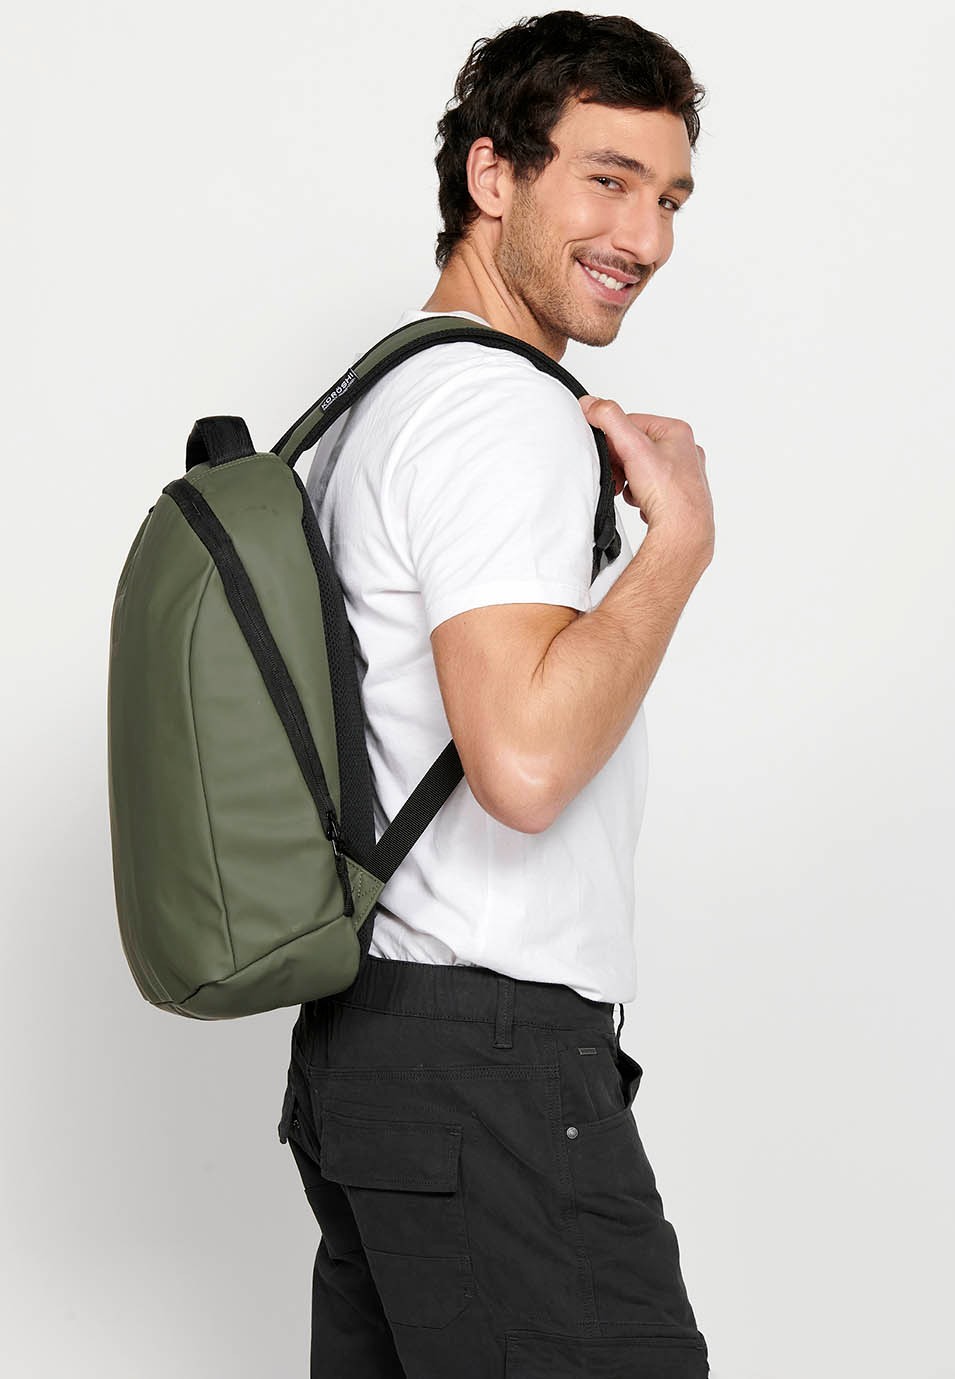 Koröshi Backpack with zipper closure and interior laptop pocket in Khaki color 6